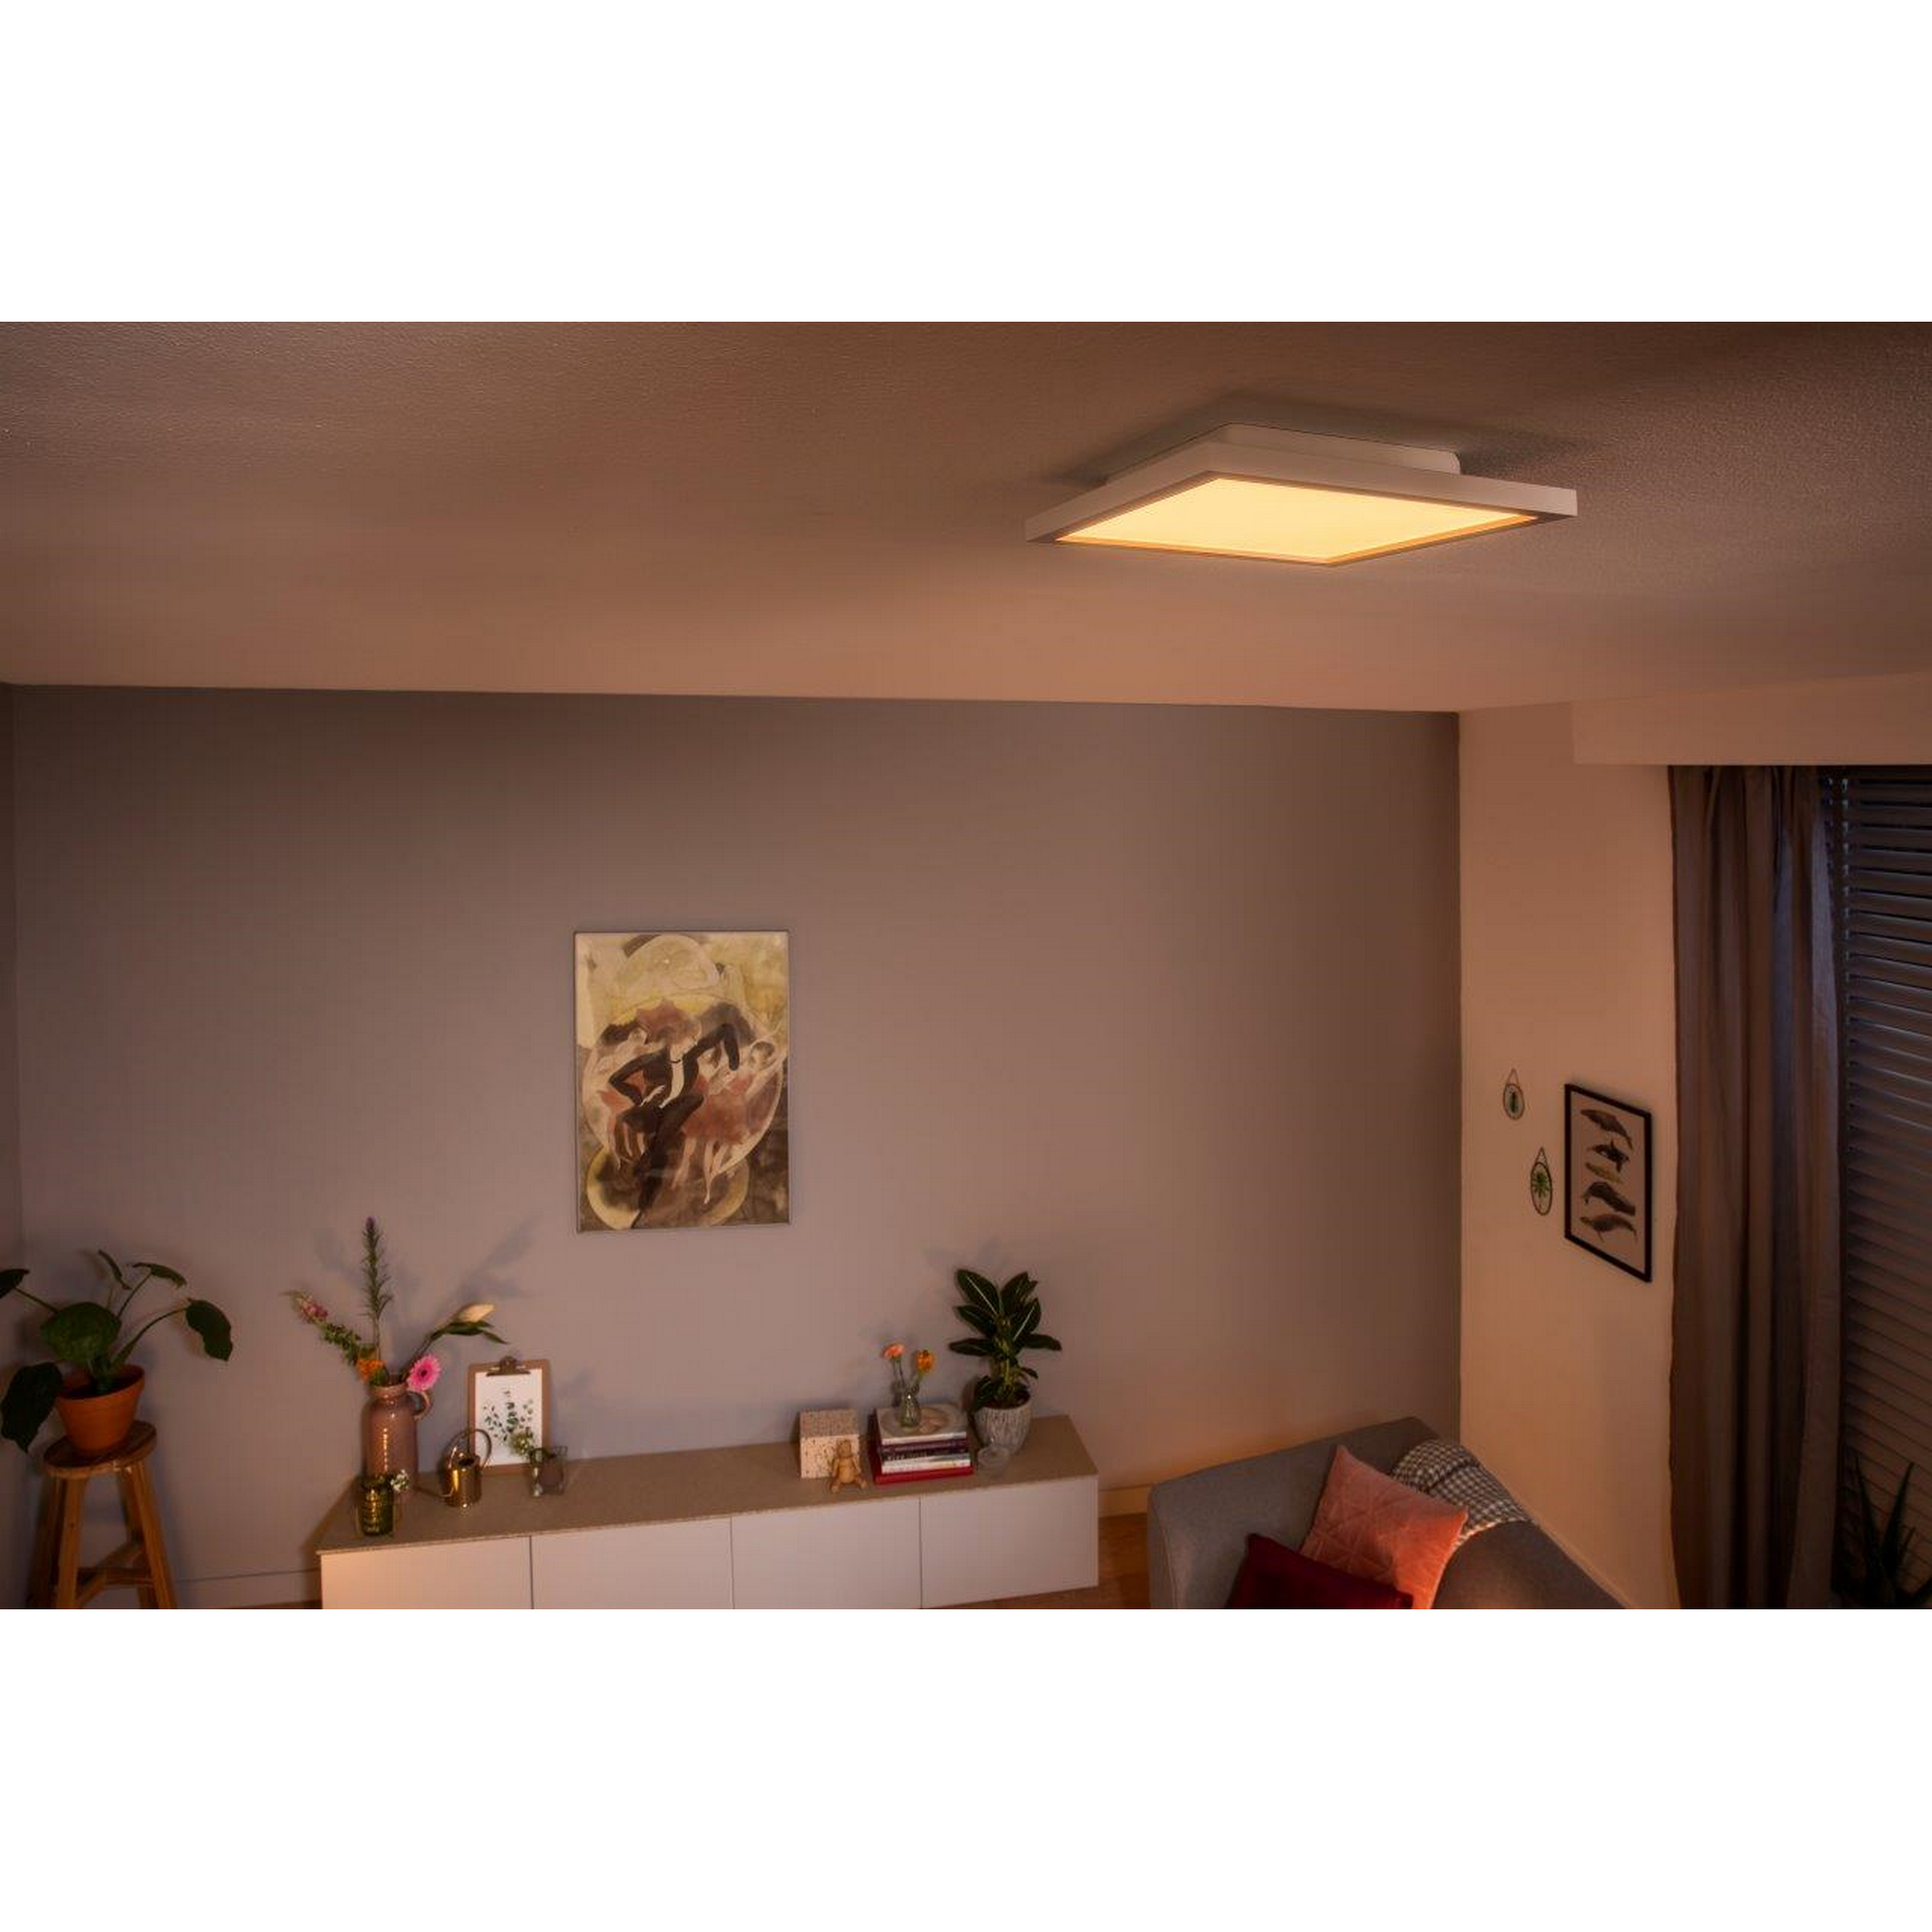 LED-Panelleuchte "Hue" Aurelle vierecking White Ambiance weiß 2200 lm + product picture